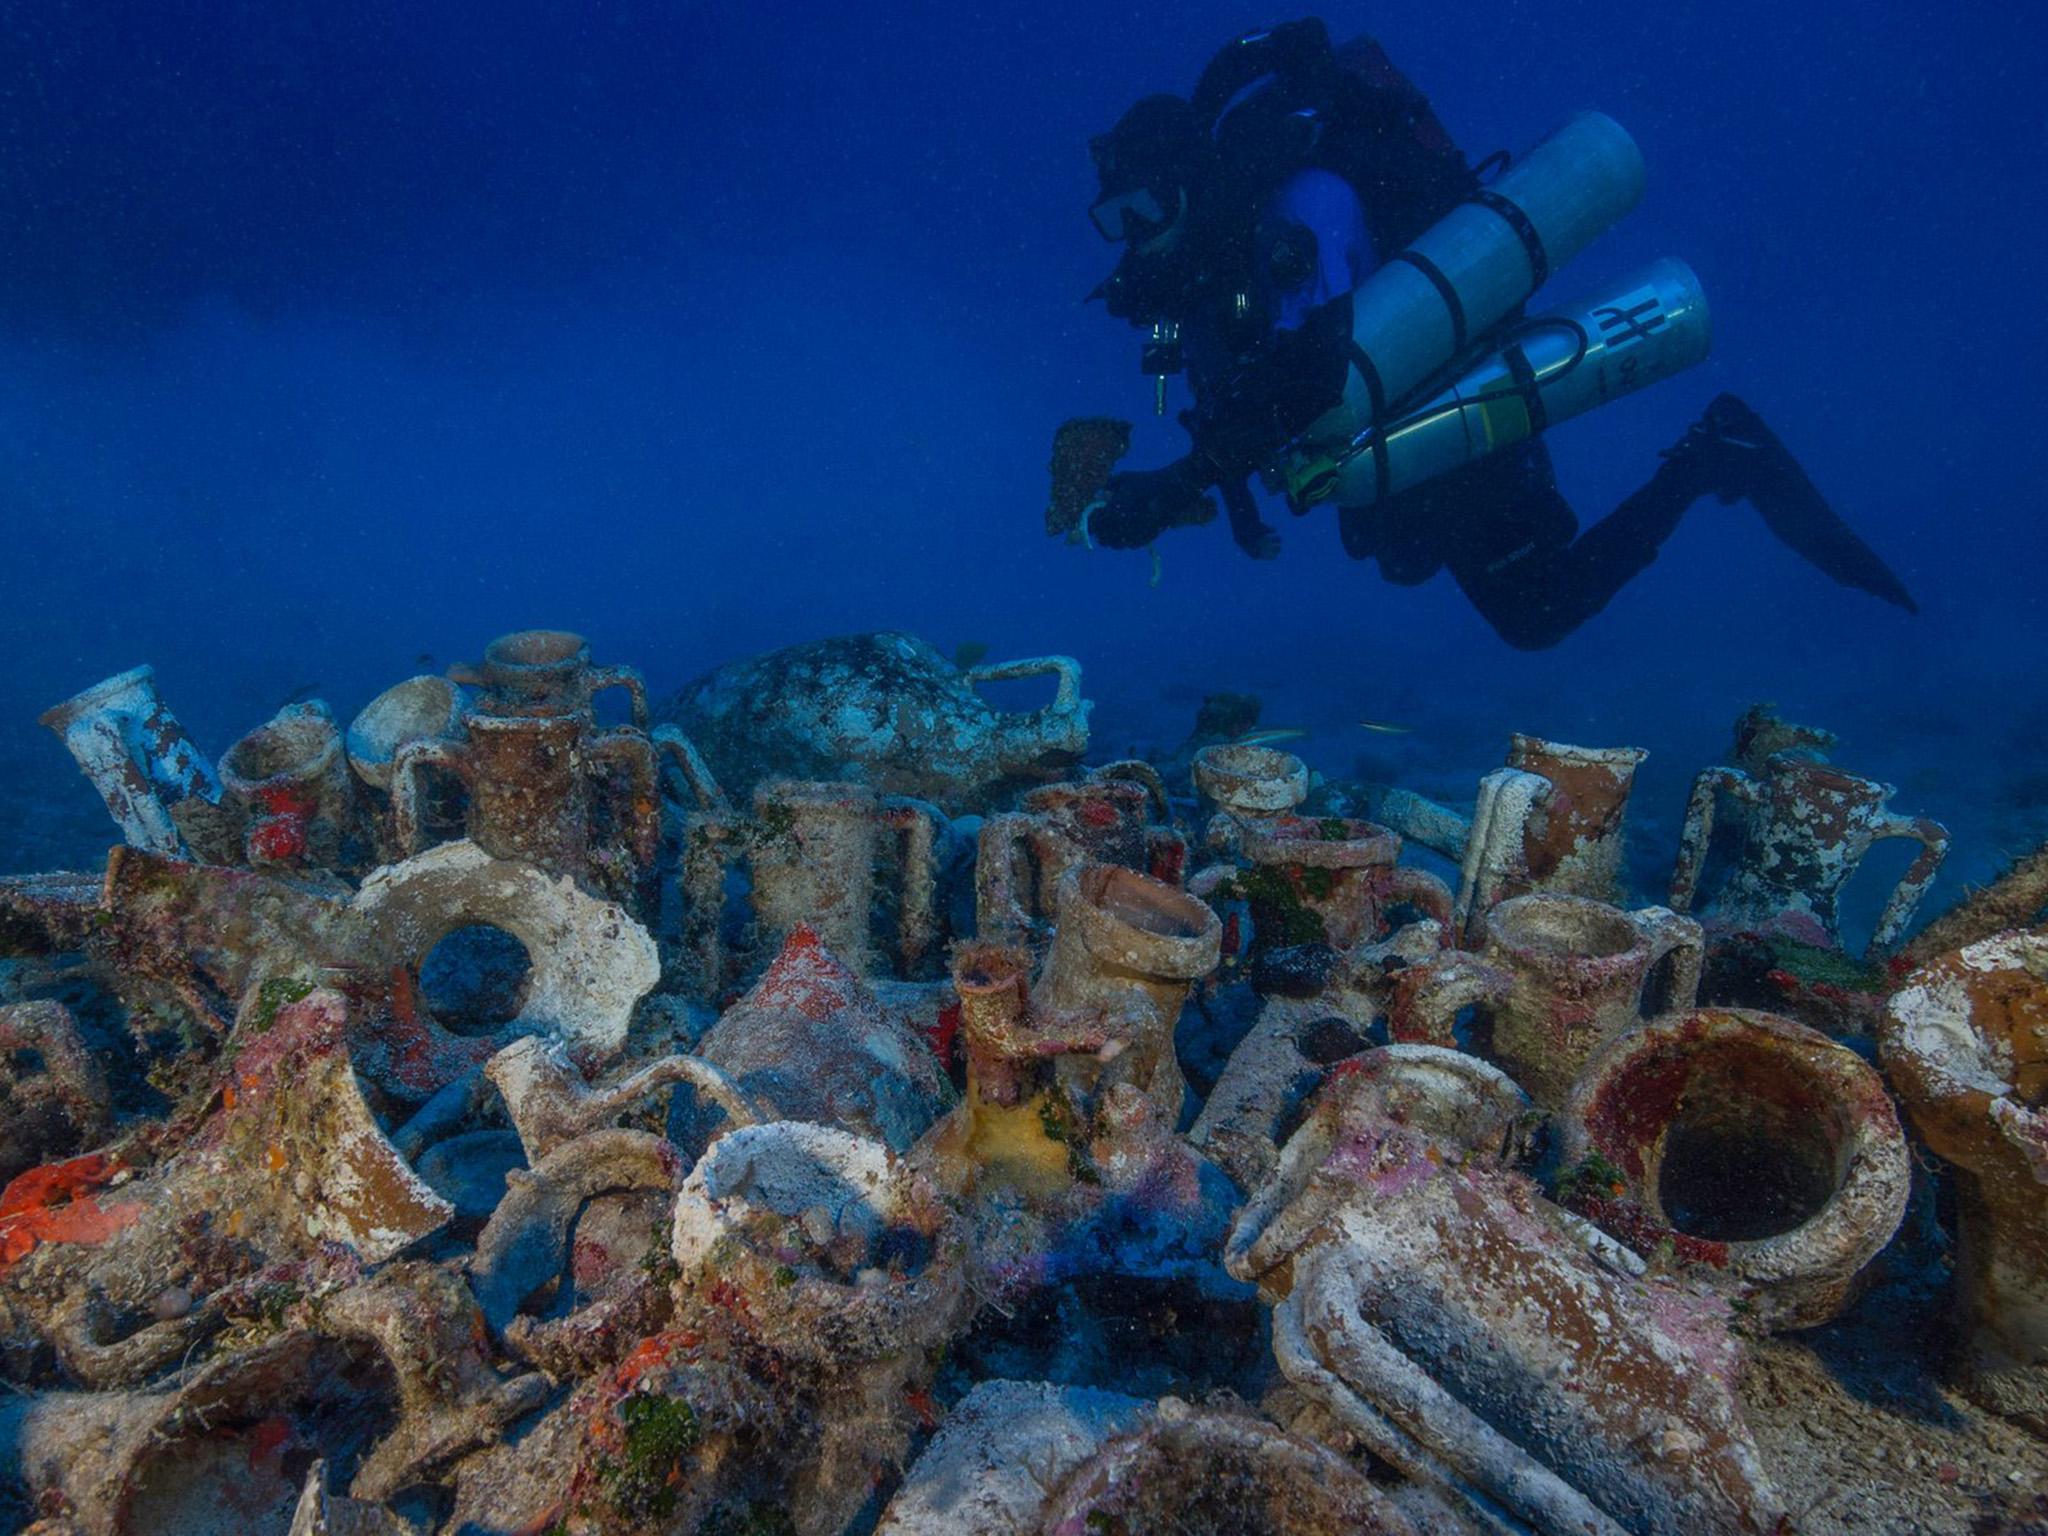 The Antikythera shipwreck has yielded numerous priceless artifacts since its discovery in 1900